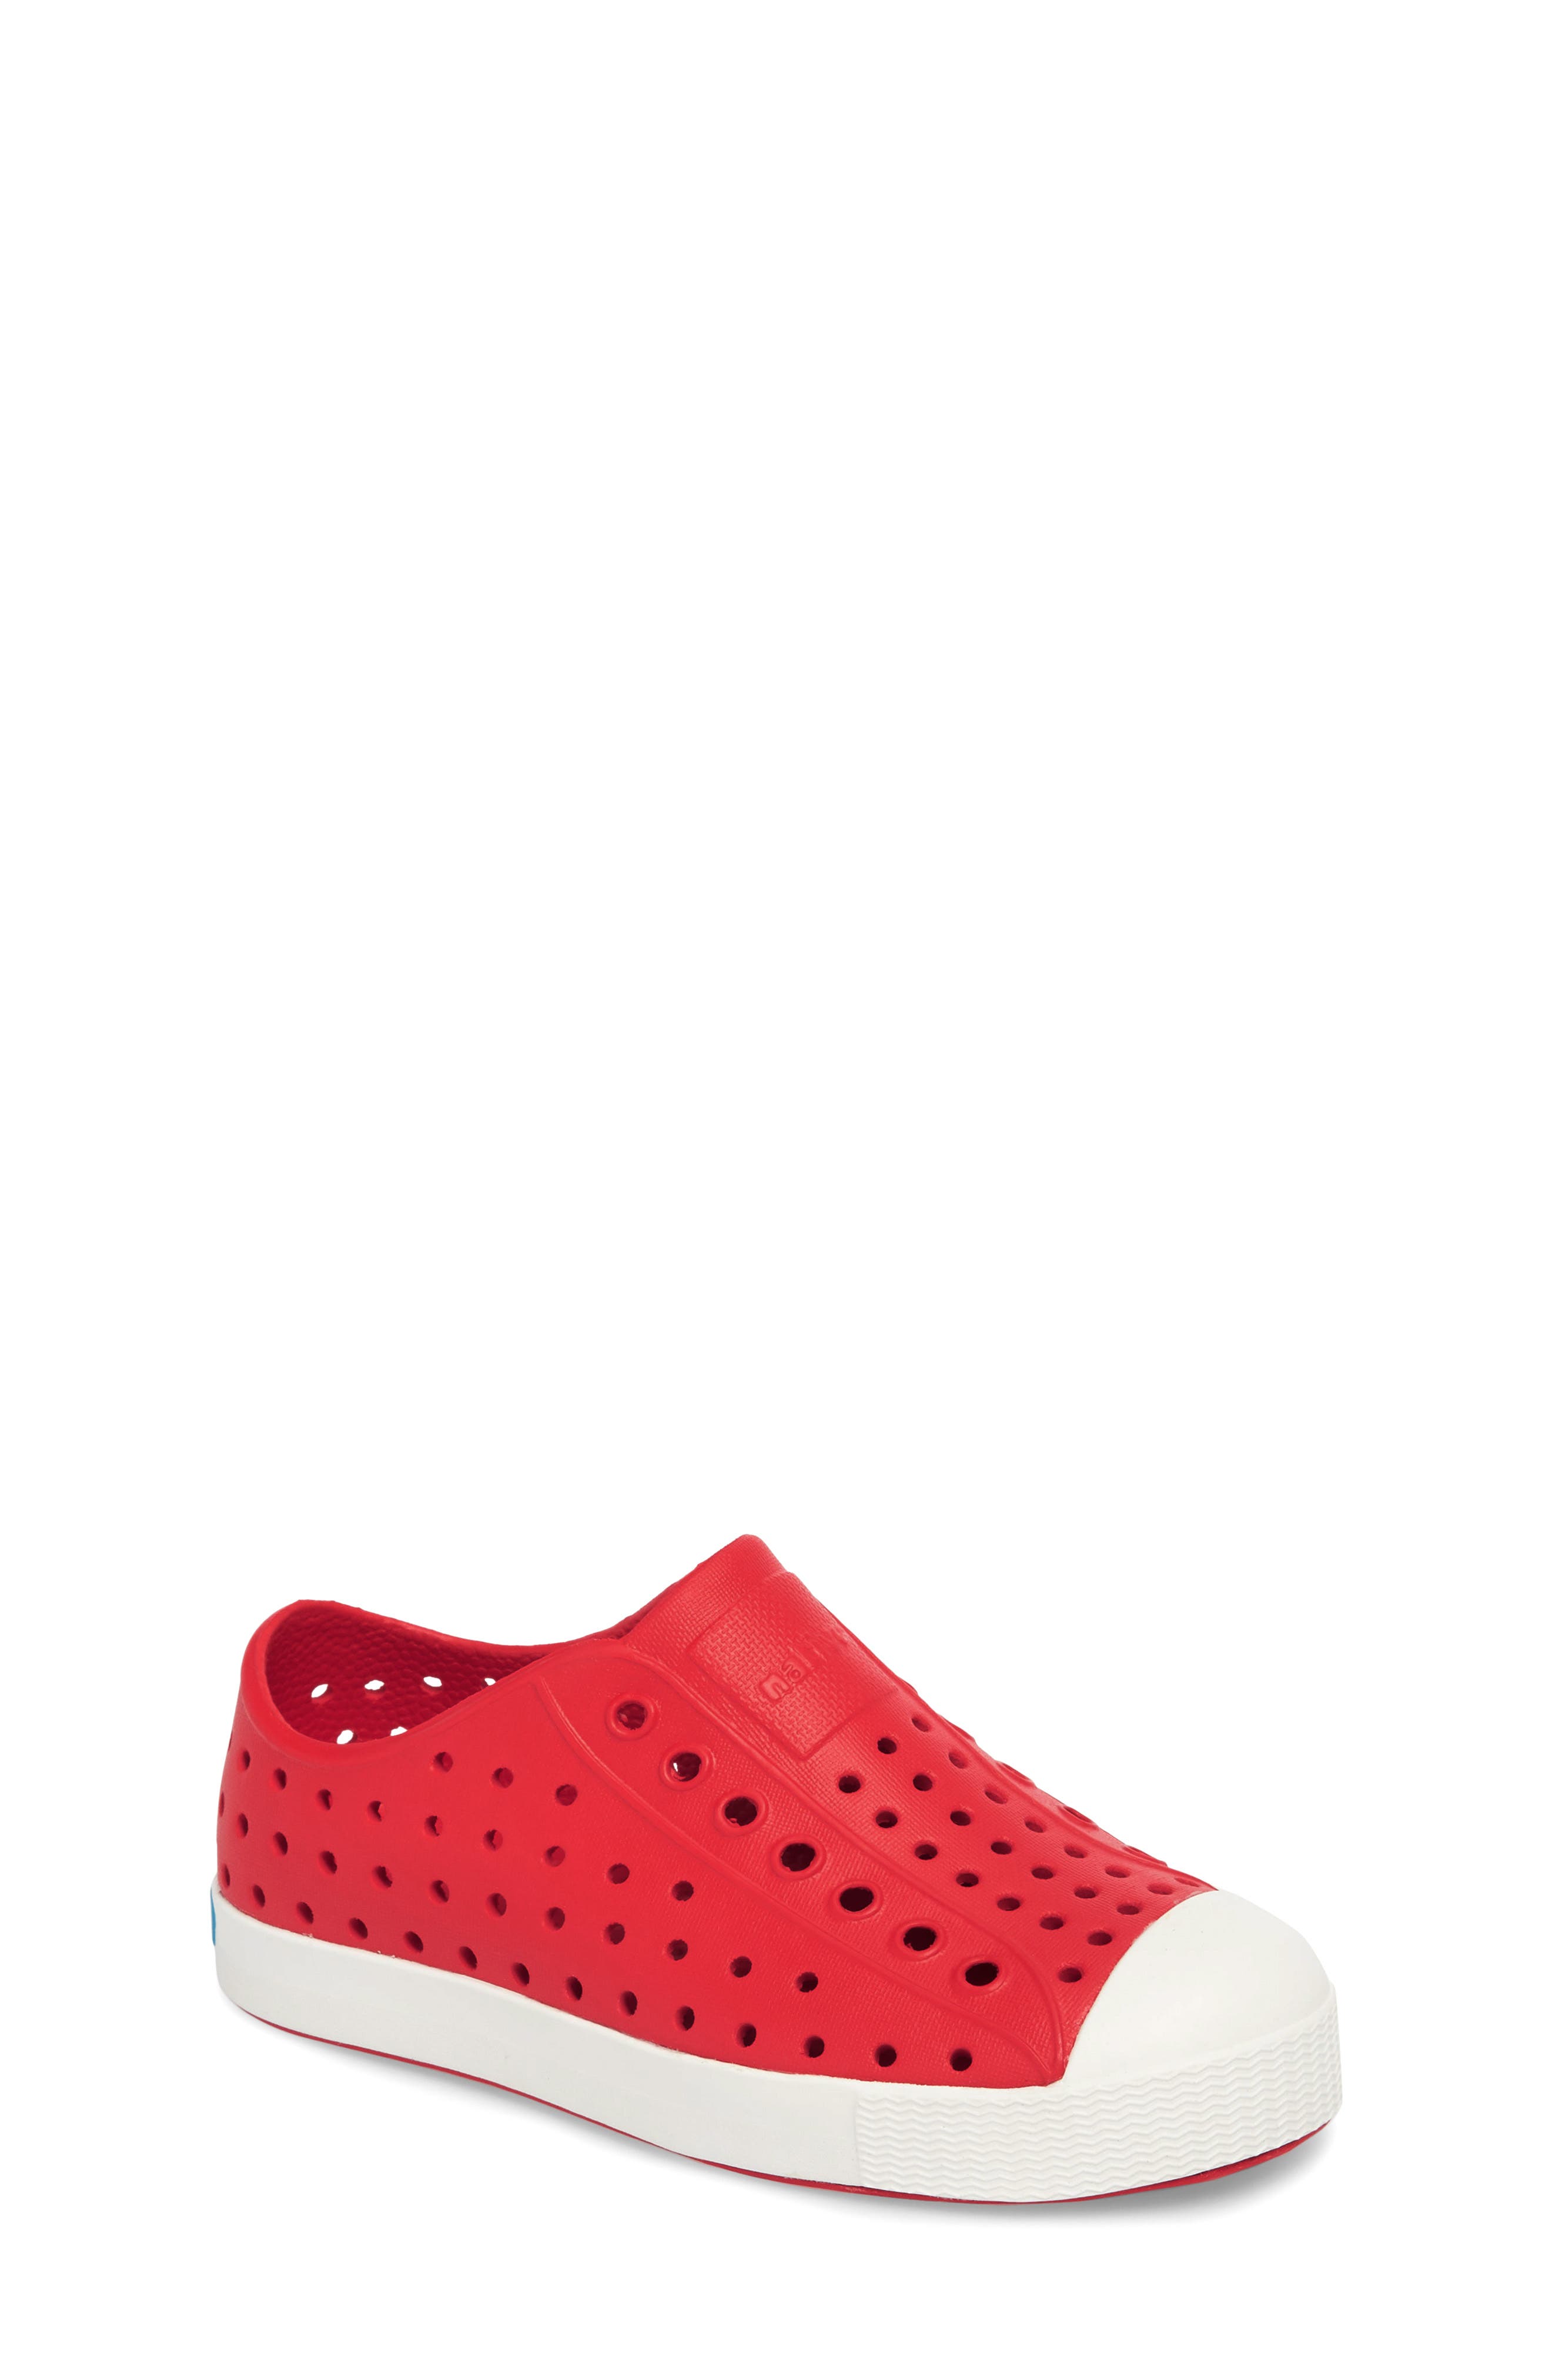 girls red shoes size 1